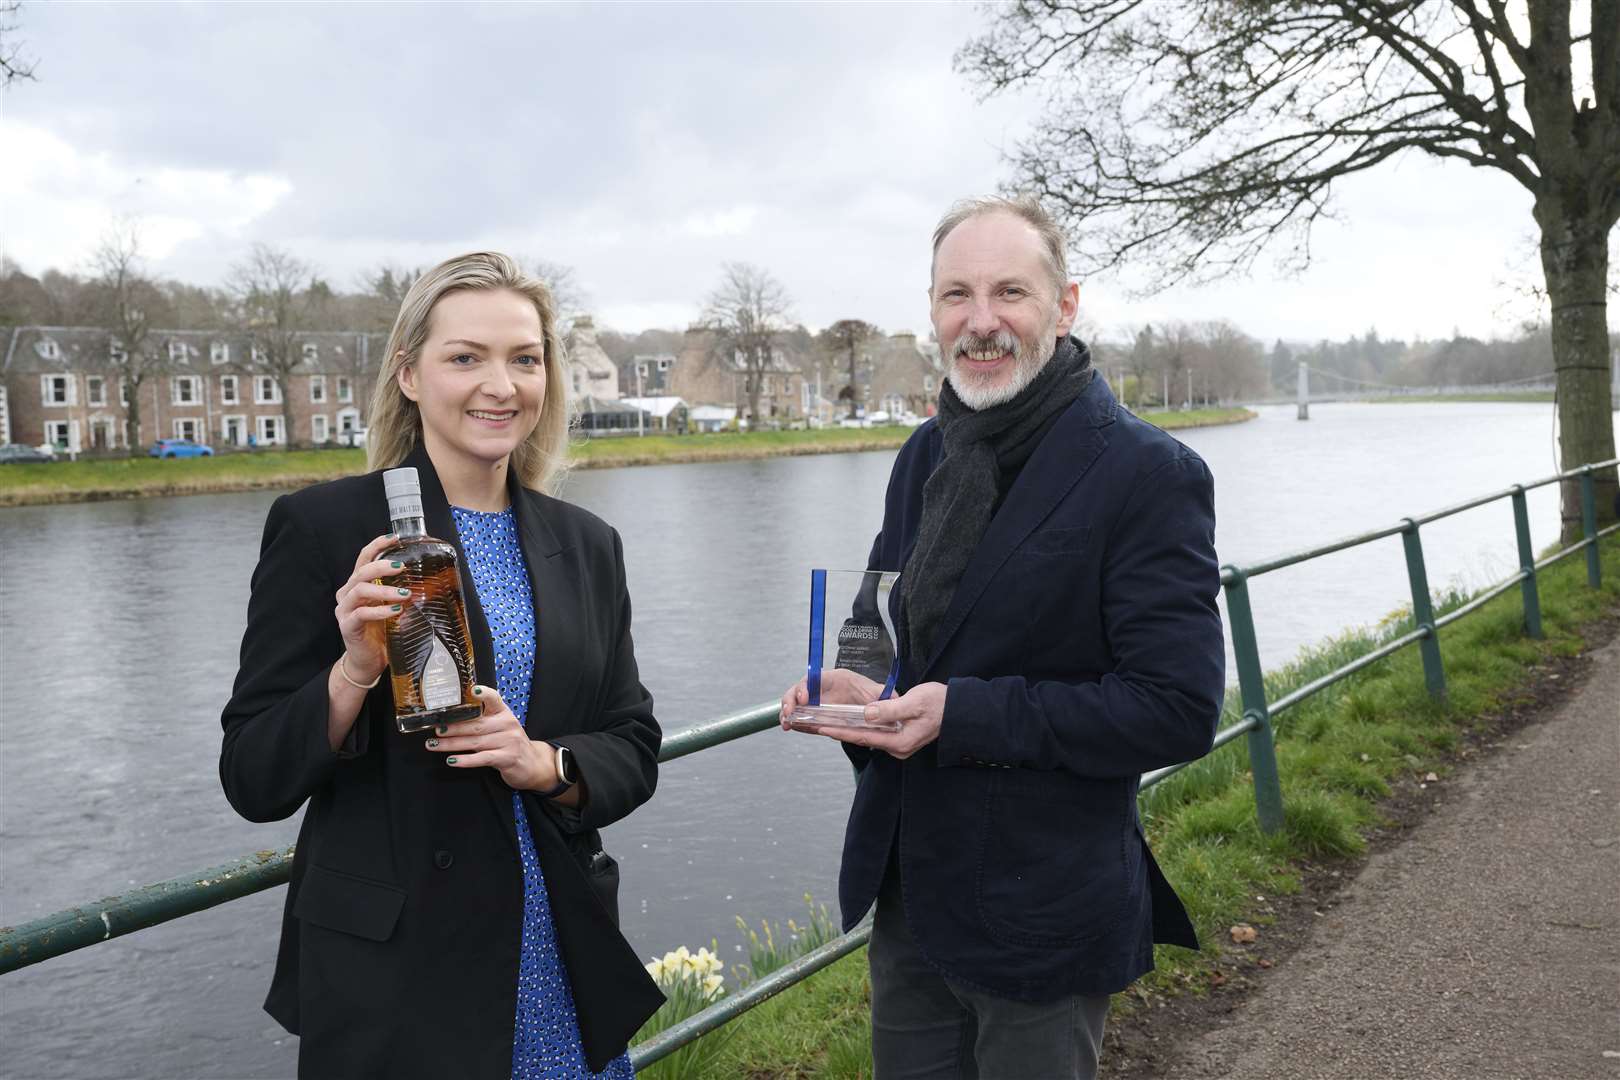 Previous award winners Julia Mackillop, senior brand manager of Cù Bòcan Single Malt and Douglas Hardie, co-owner of Bad Girl Bakery and director of Highland Food & Drink Trail. Picture: Ewan Wetherspoon